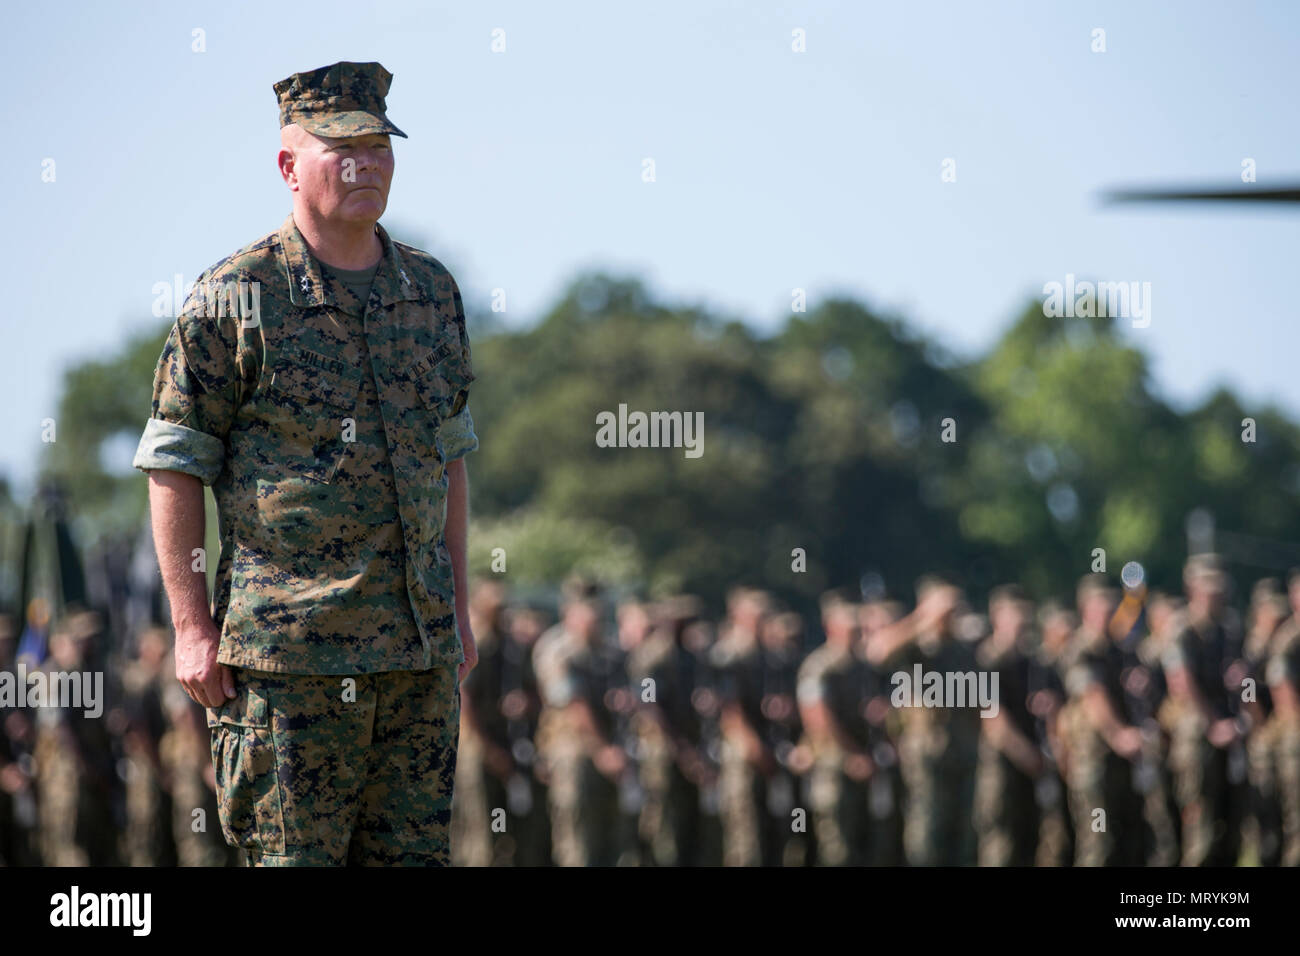 U.S. Marine Corps Maj. Gen. Walter L. Miller Jr., former commanding general of the II Marine Expeditionary Force (MEF), stands at attention during a change of command ceremony on Camp Lejeune, N.C., July 14, 2017. During the ceremony, Miller relinquished his command as commanding general of II MEF to Lt. Gen. Robert F. Hedelund. (U.S. Marine Corps photo by Lance Cpl. Koby I. Saunders) Stock Photo